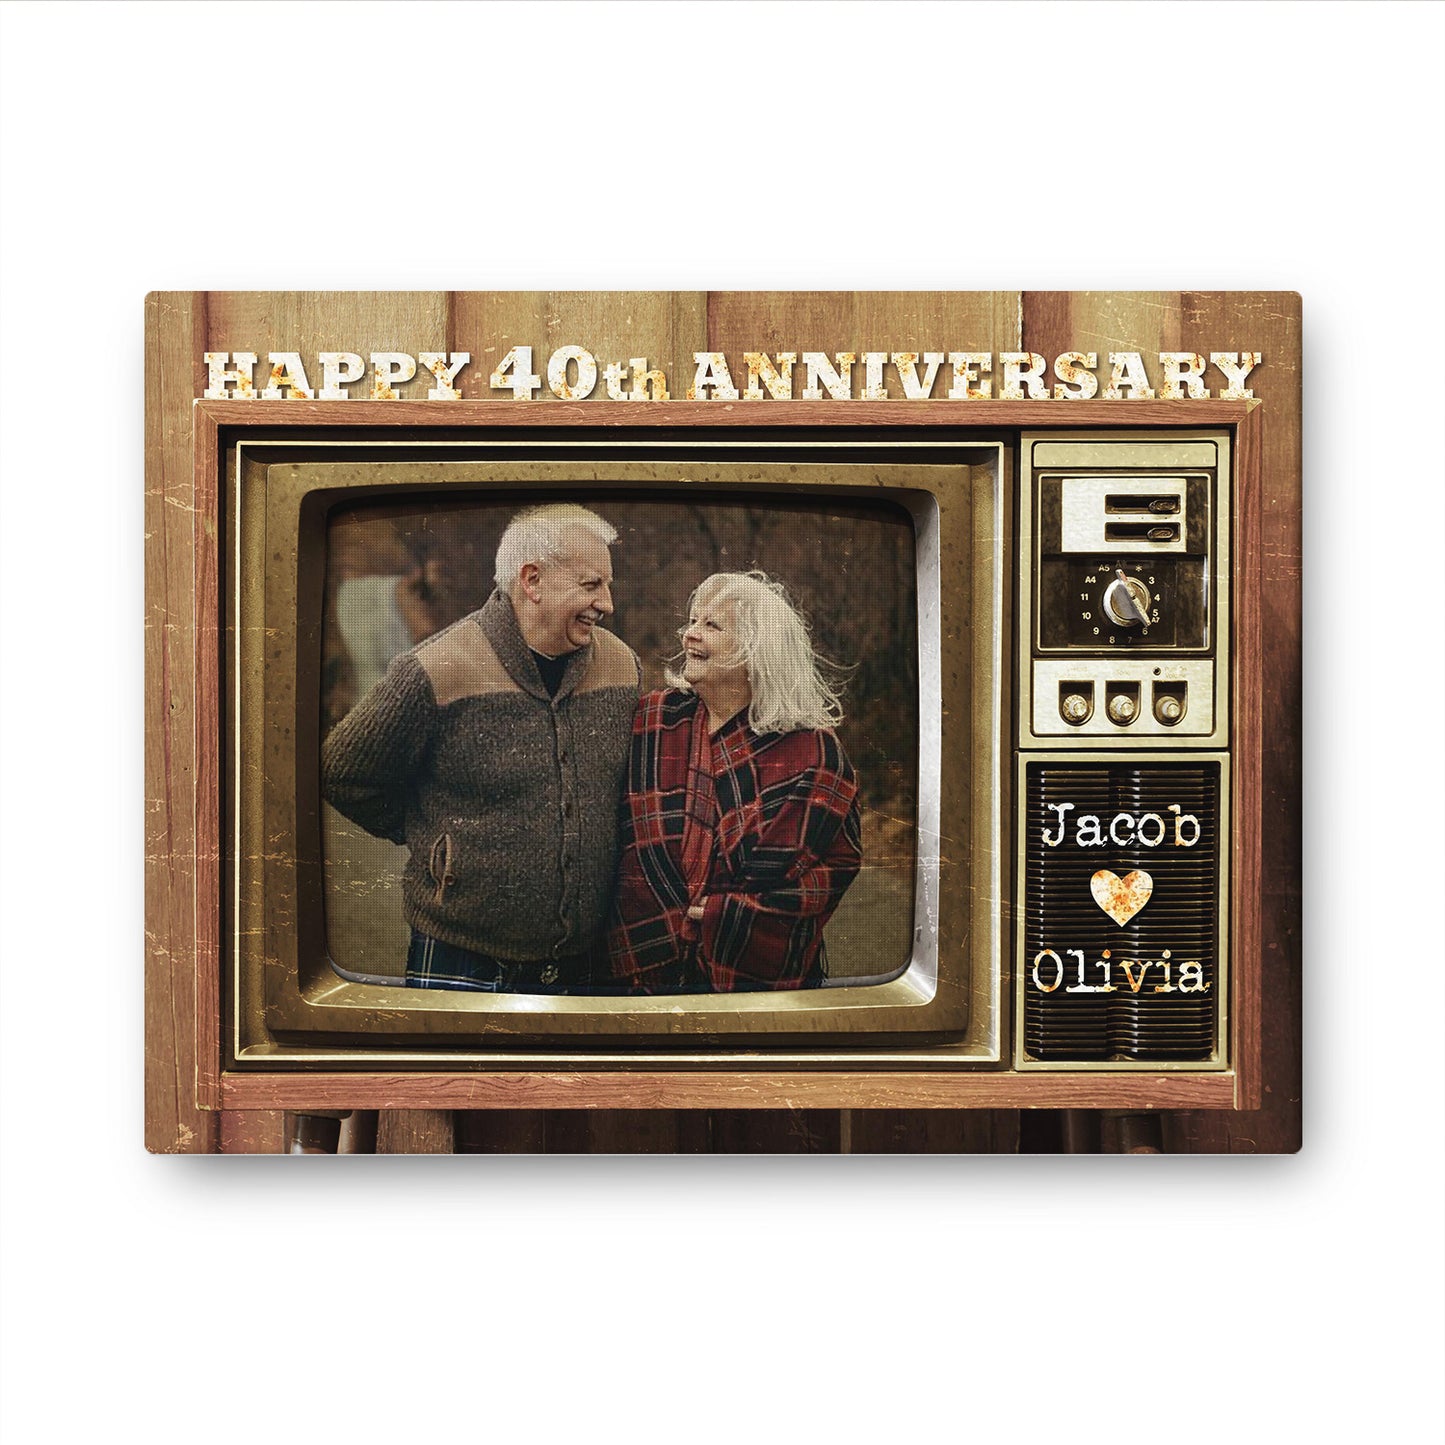 Happy 40th Anniversary Old Television Custom Image Canvas